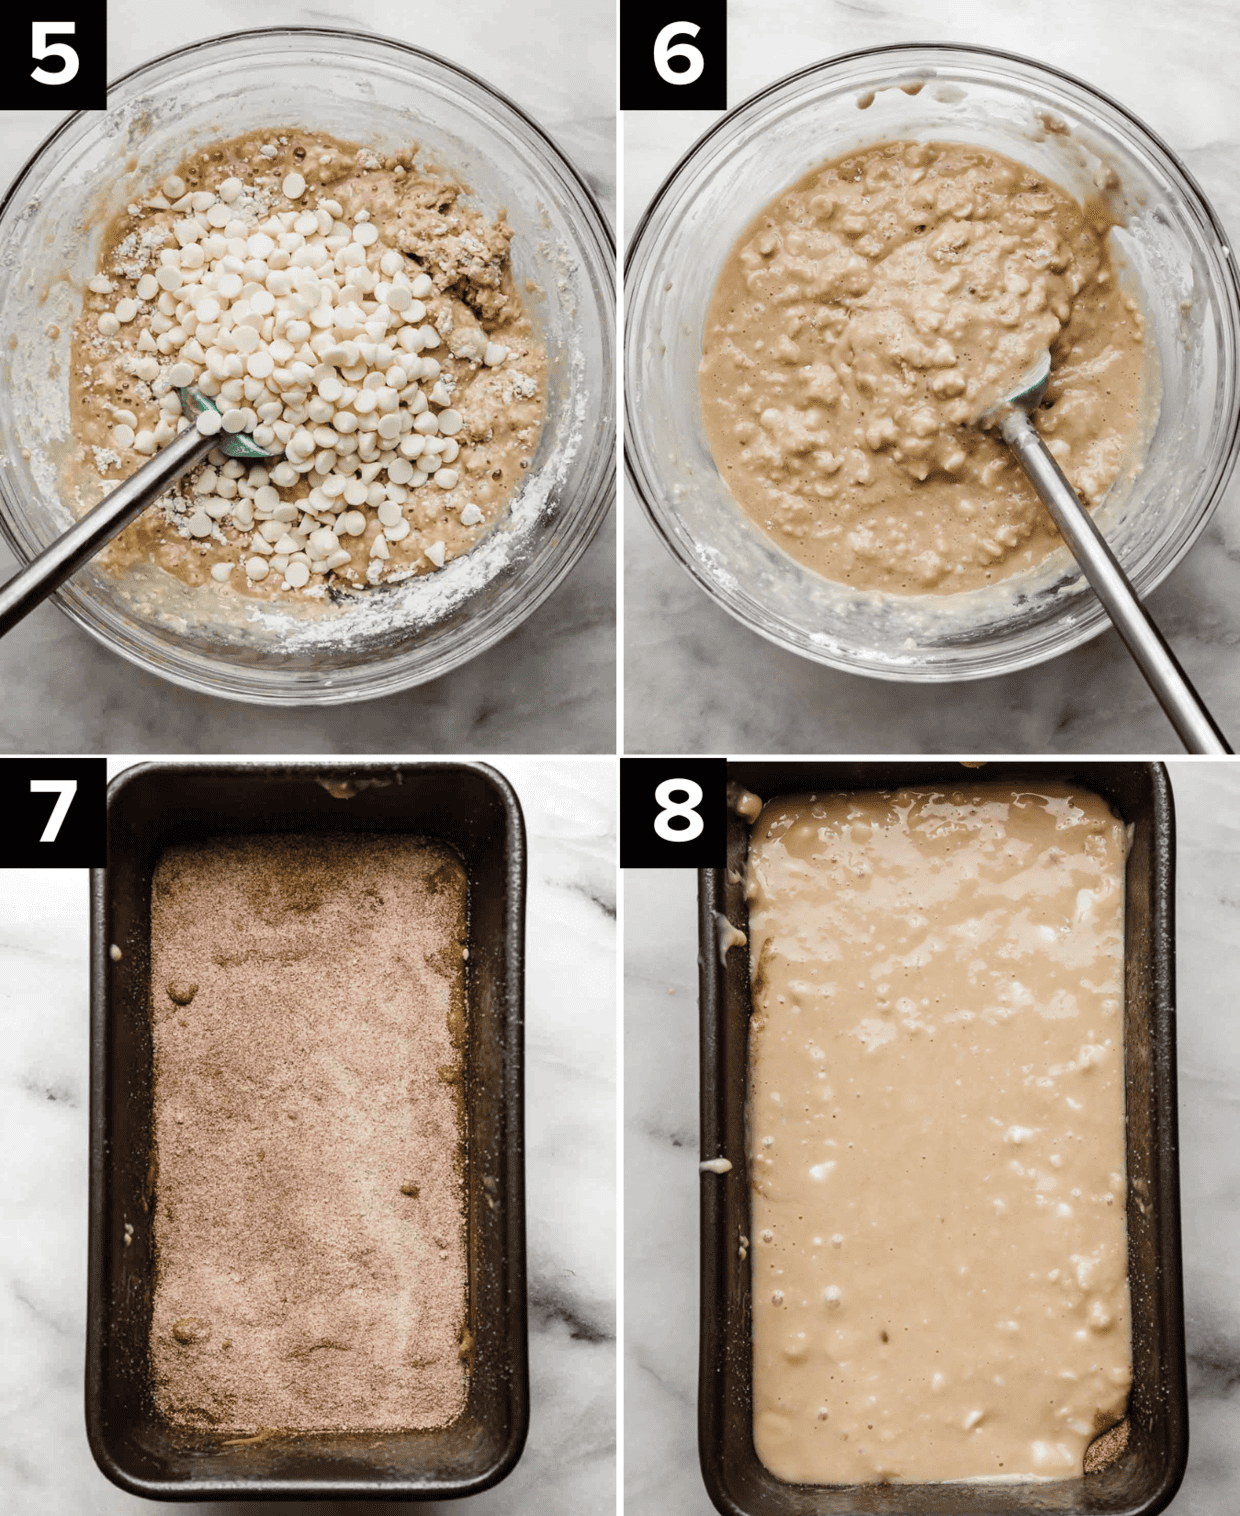 Cinnamon Swirl Bread batter in a glass bowl with white chocolate chips (top 2 photos), bottom two photos are a bread pan with the batter in it and cinnamon sugar sprinkled overtop. 